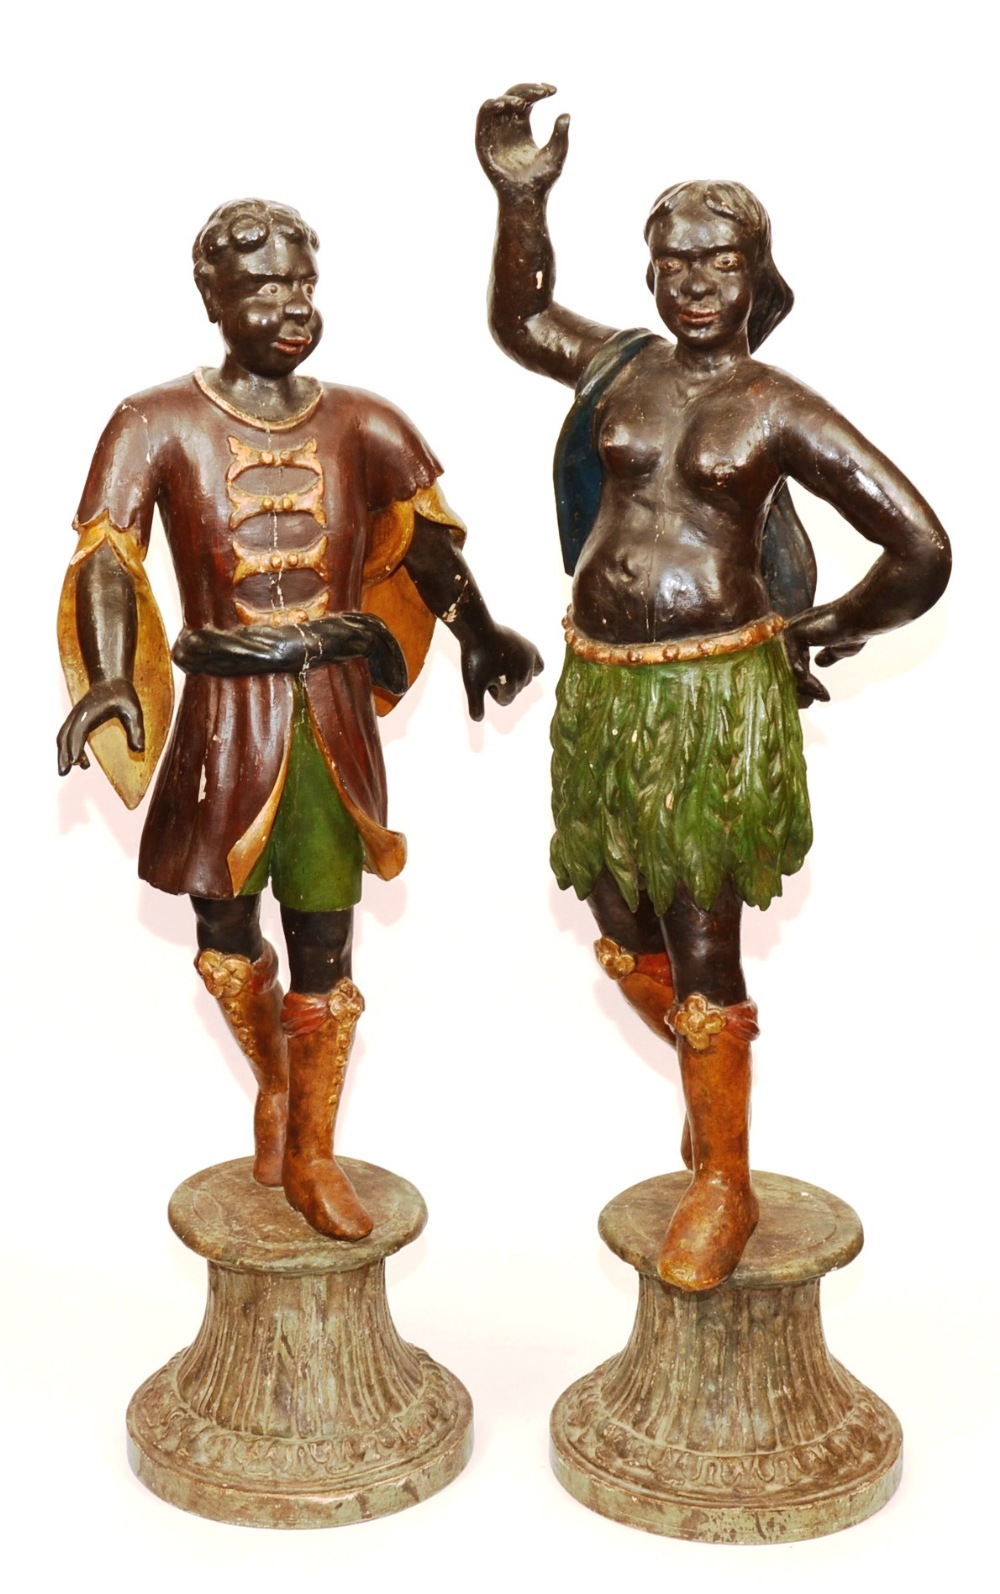 A pair of Italian Blackamoor figures, circa early 18th century, in the form of a male and female,